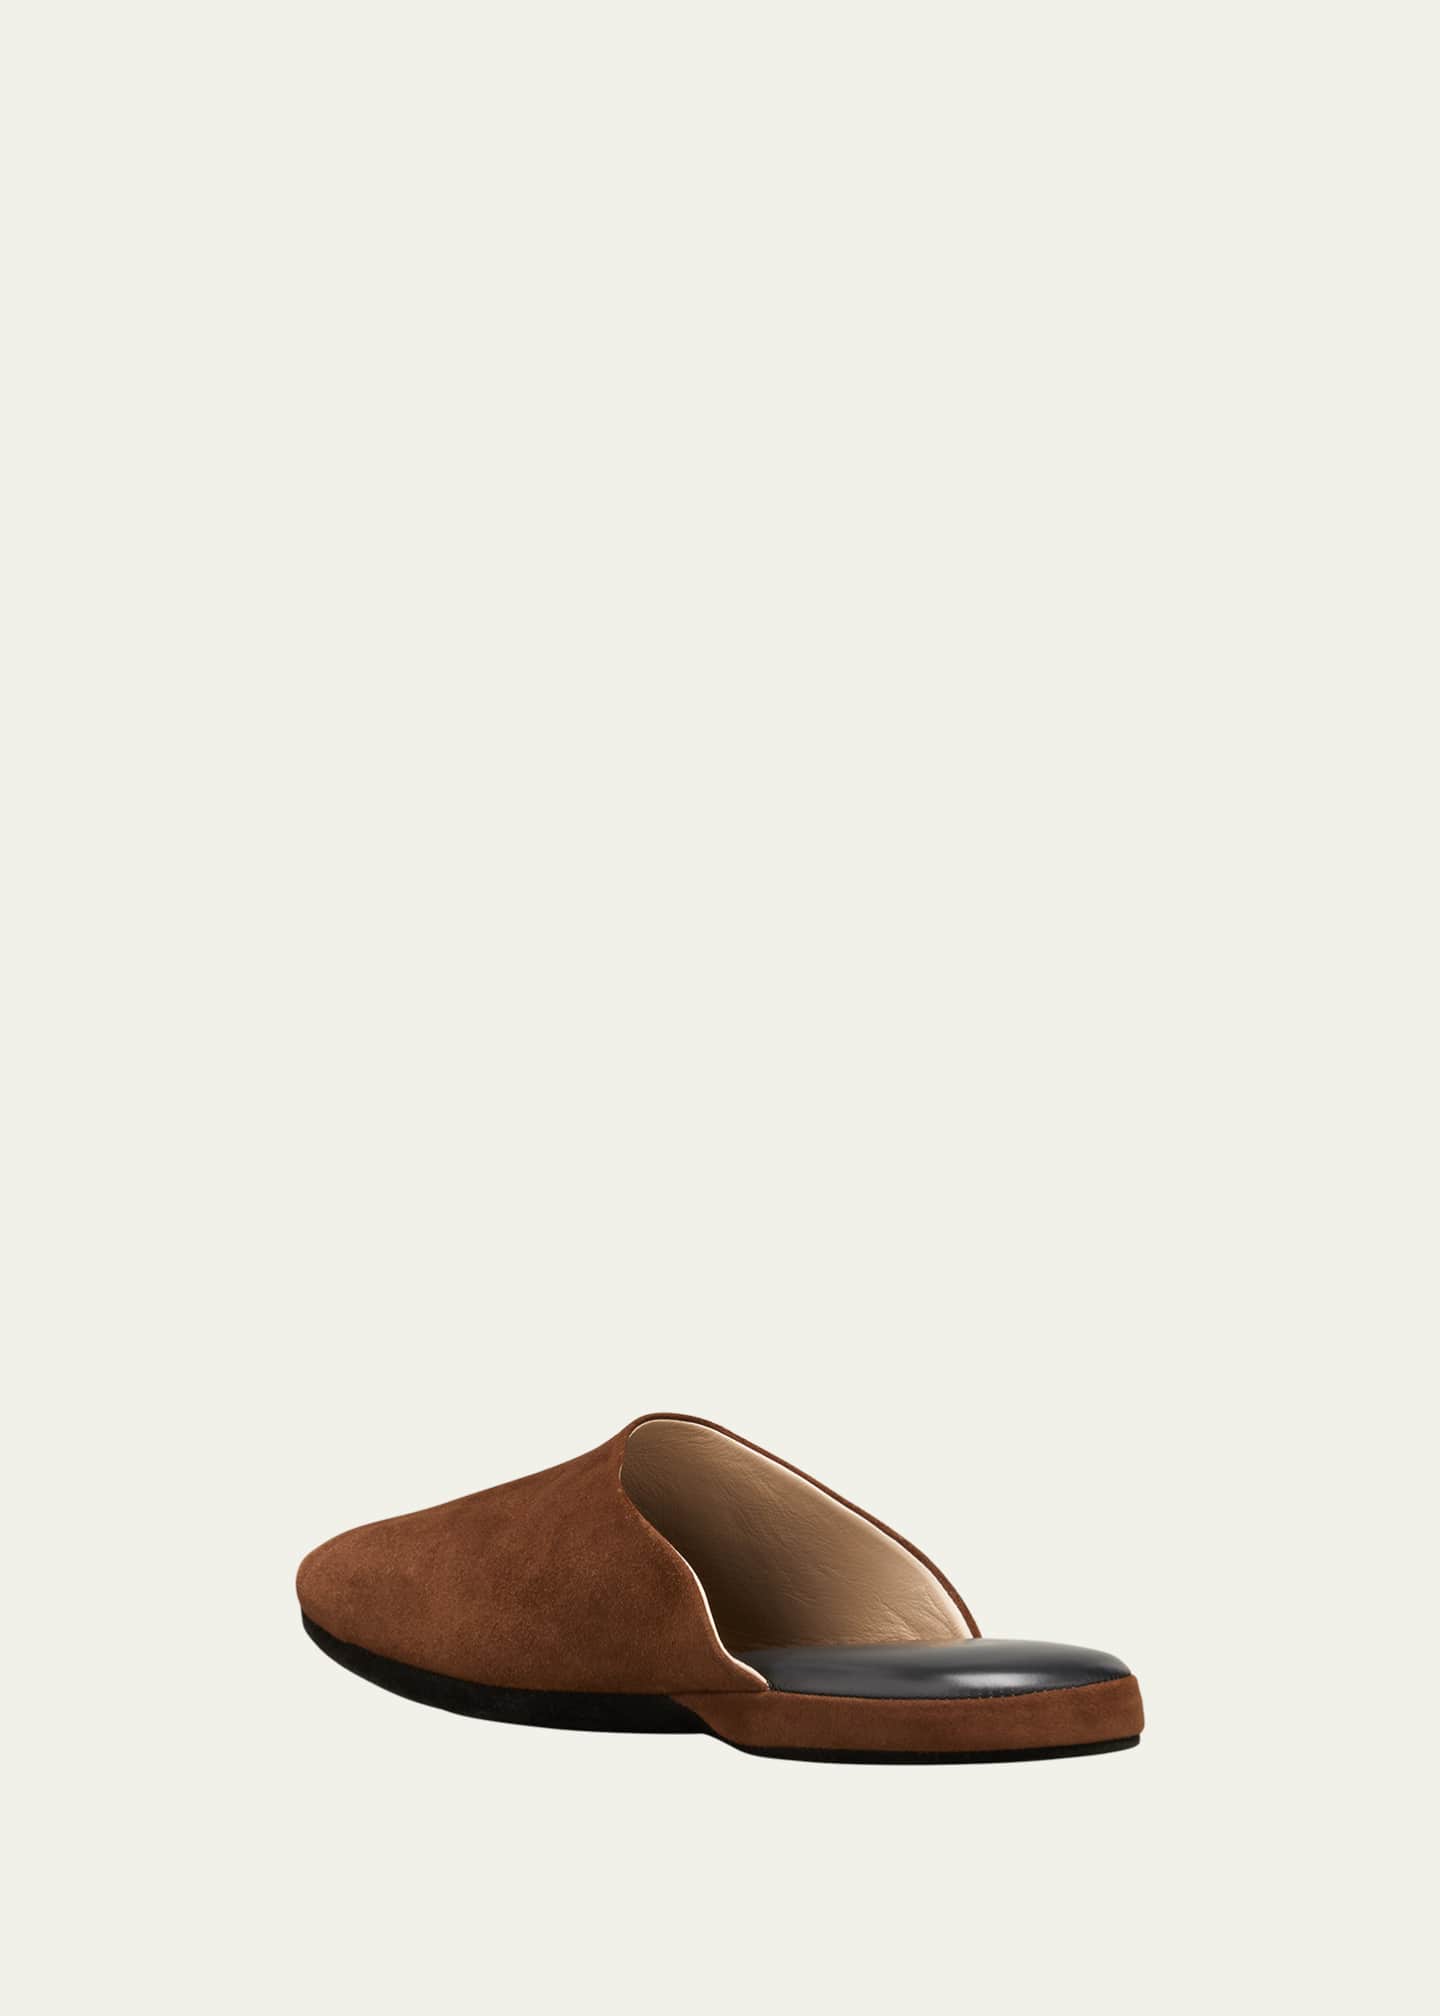 lonely Green complicated Charvet Men's Suede Slippers - Bergdorf Goodman